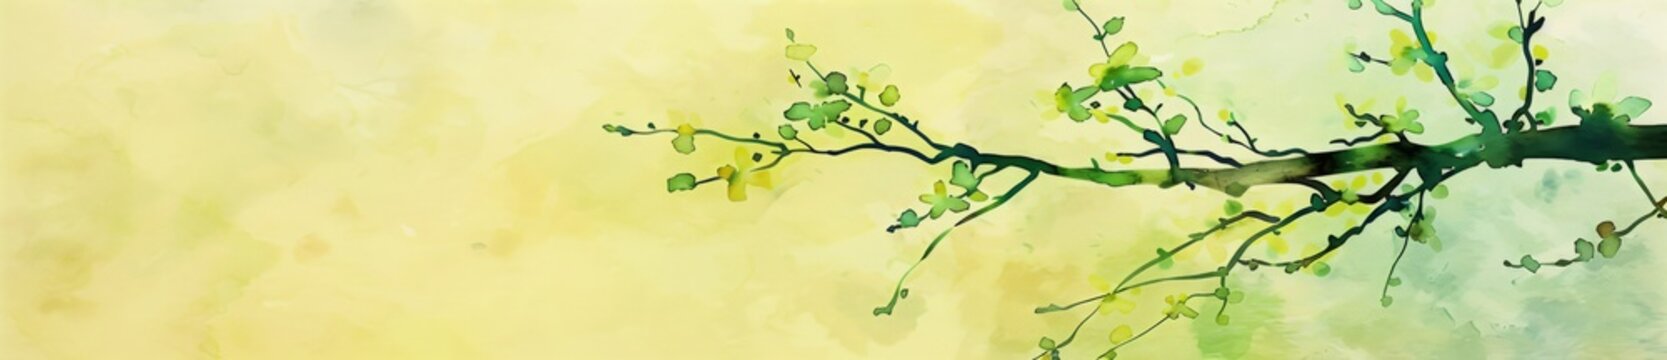 Graceful tree branch adorned with fresh green leaves against gentle yellow backdrop. Perfect for romantic spring-themed card, banner, or celebration decoration.